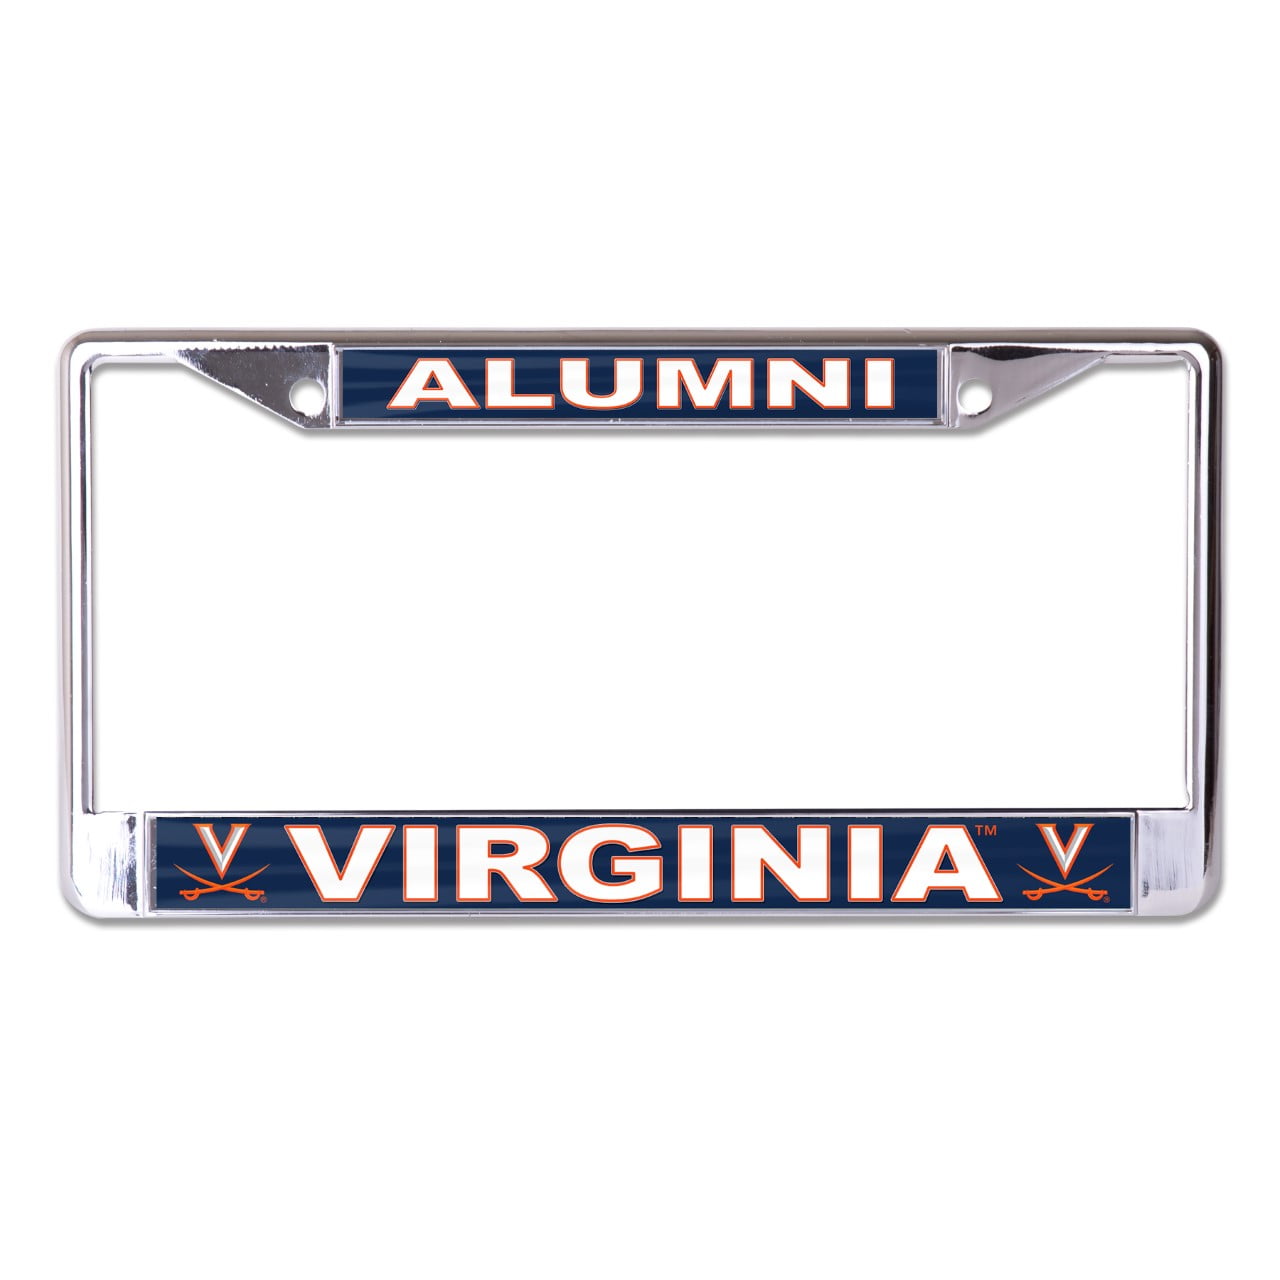 Made In Virginia Black Steel Metal License Plate Frame Car Auto Tag Holder 